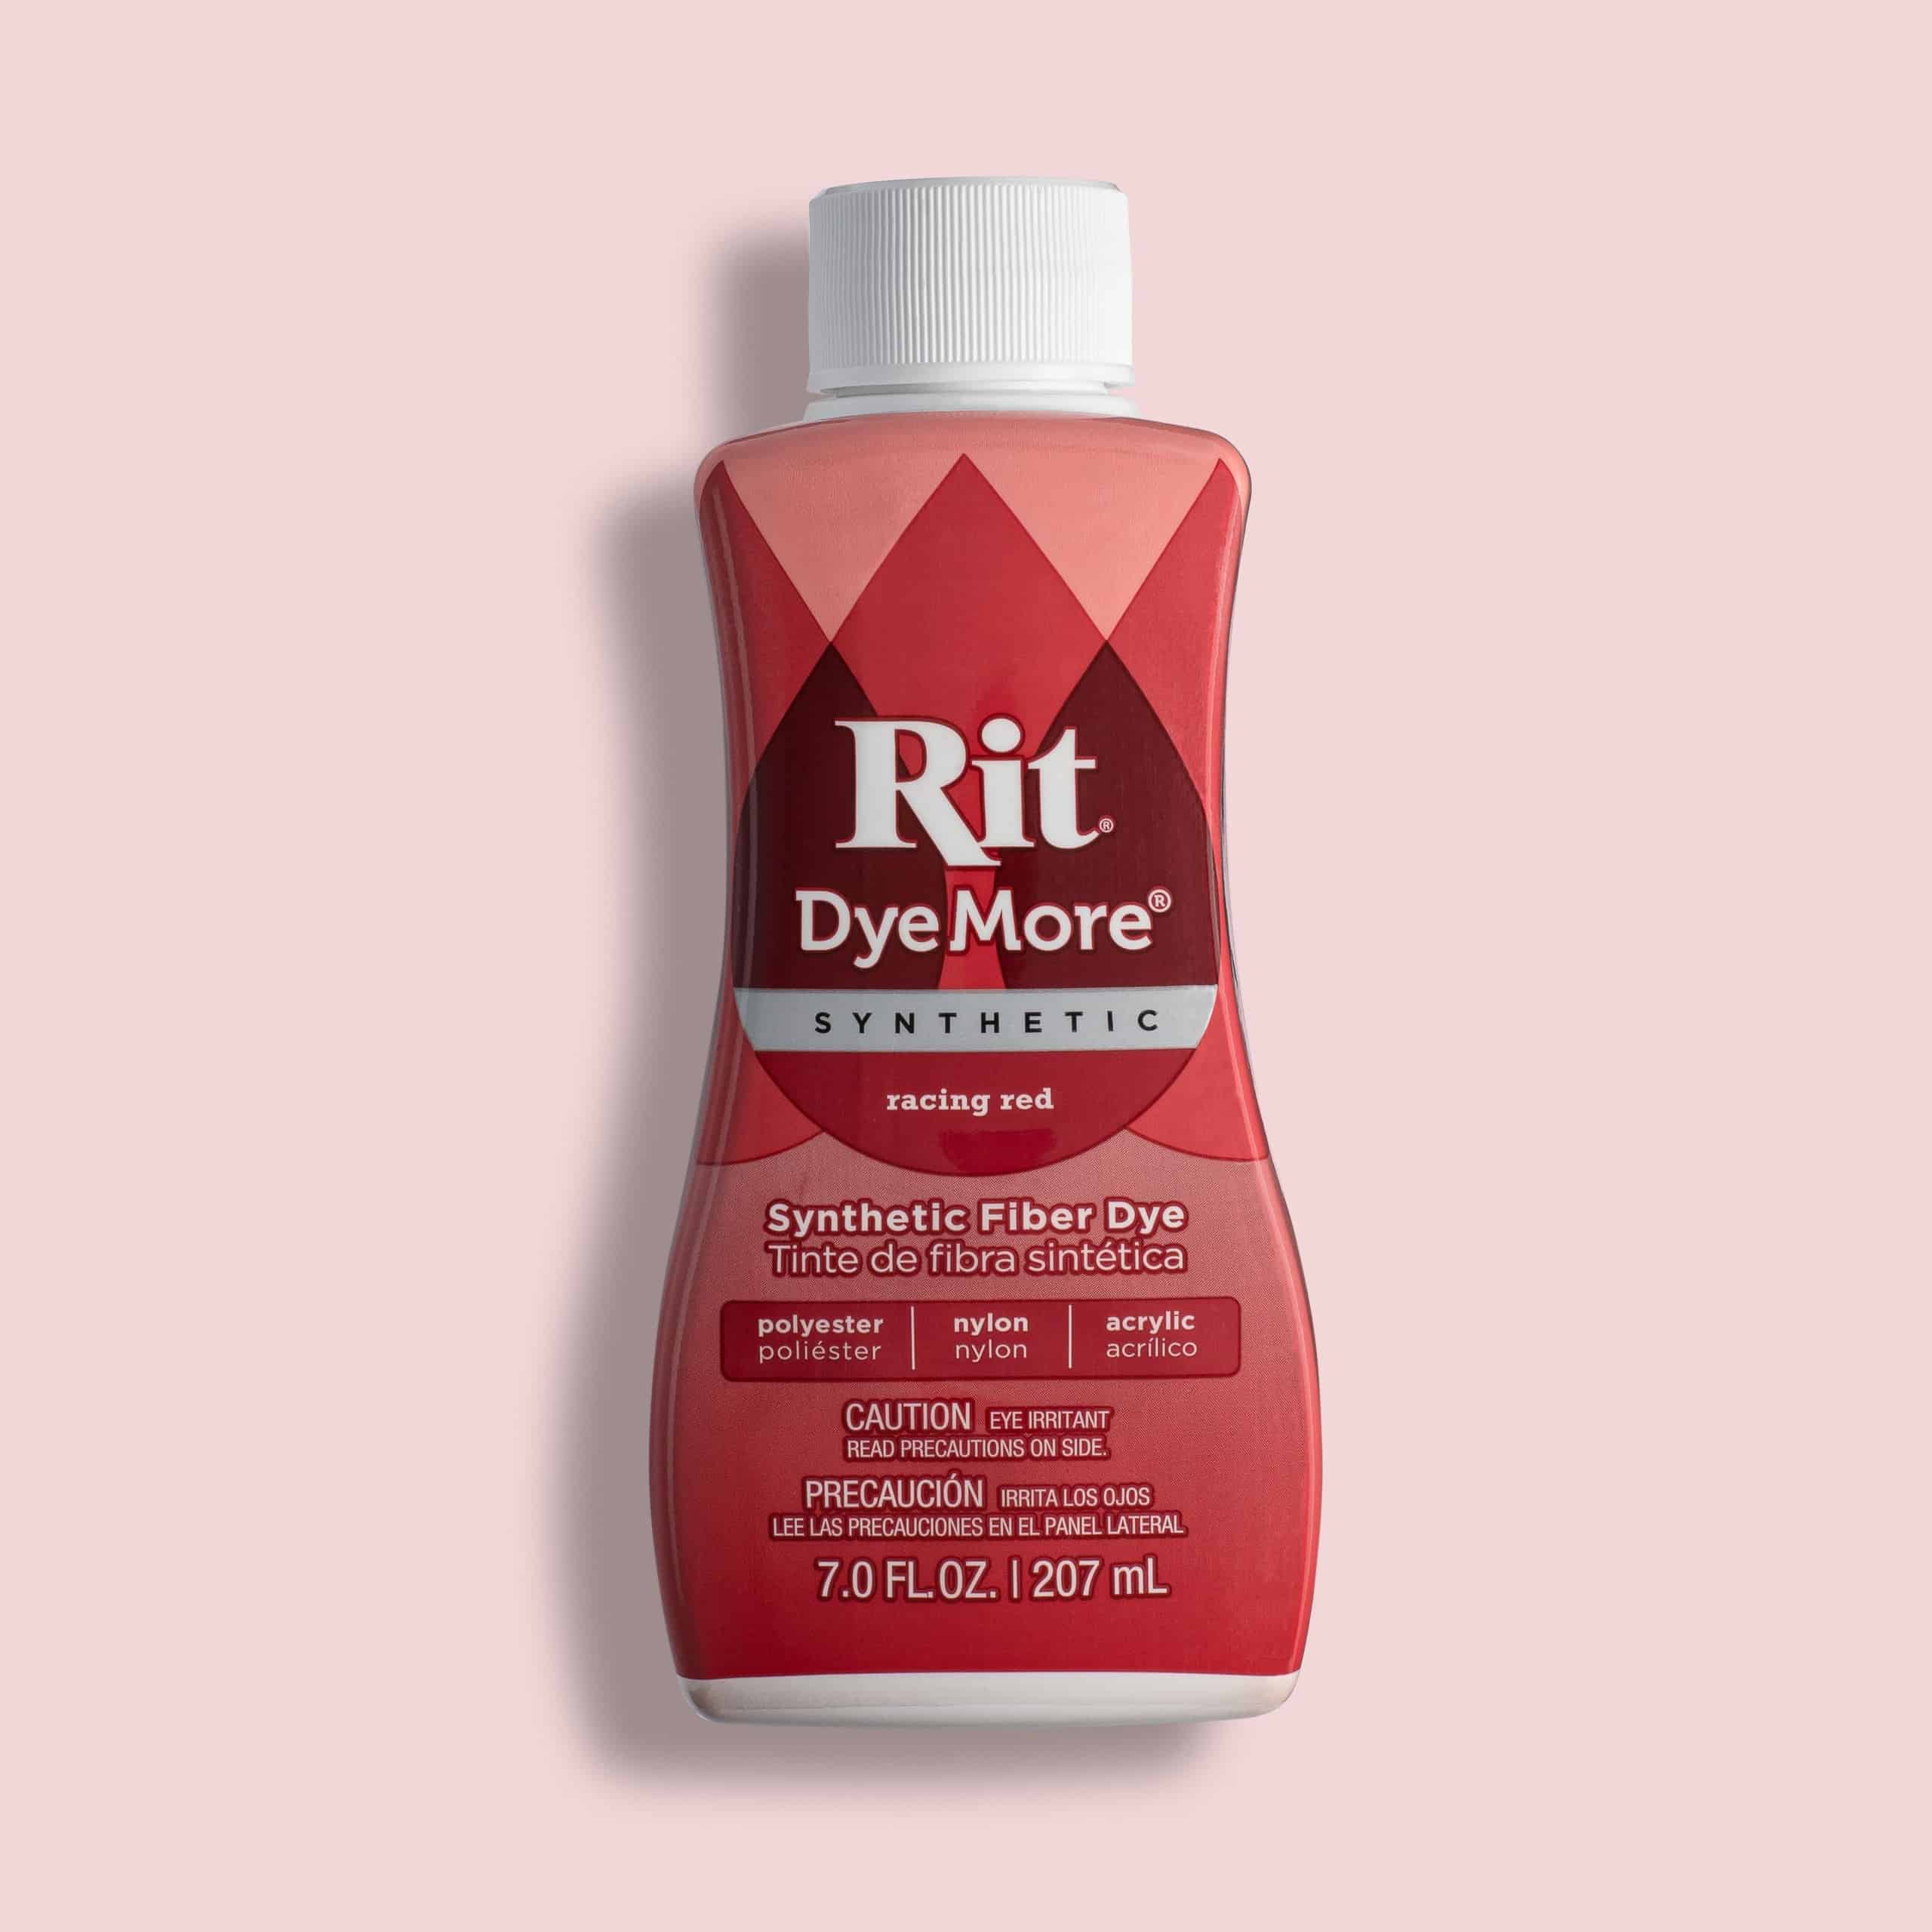 Racing Red DyeMore for Rit Dye